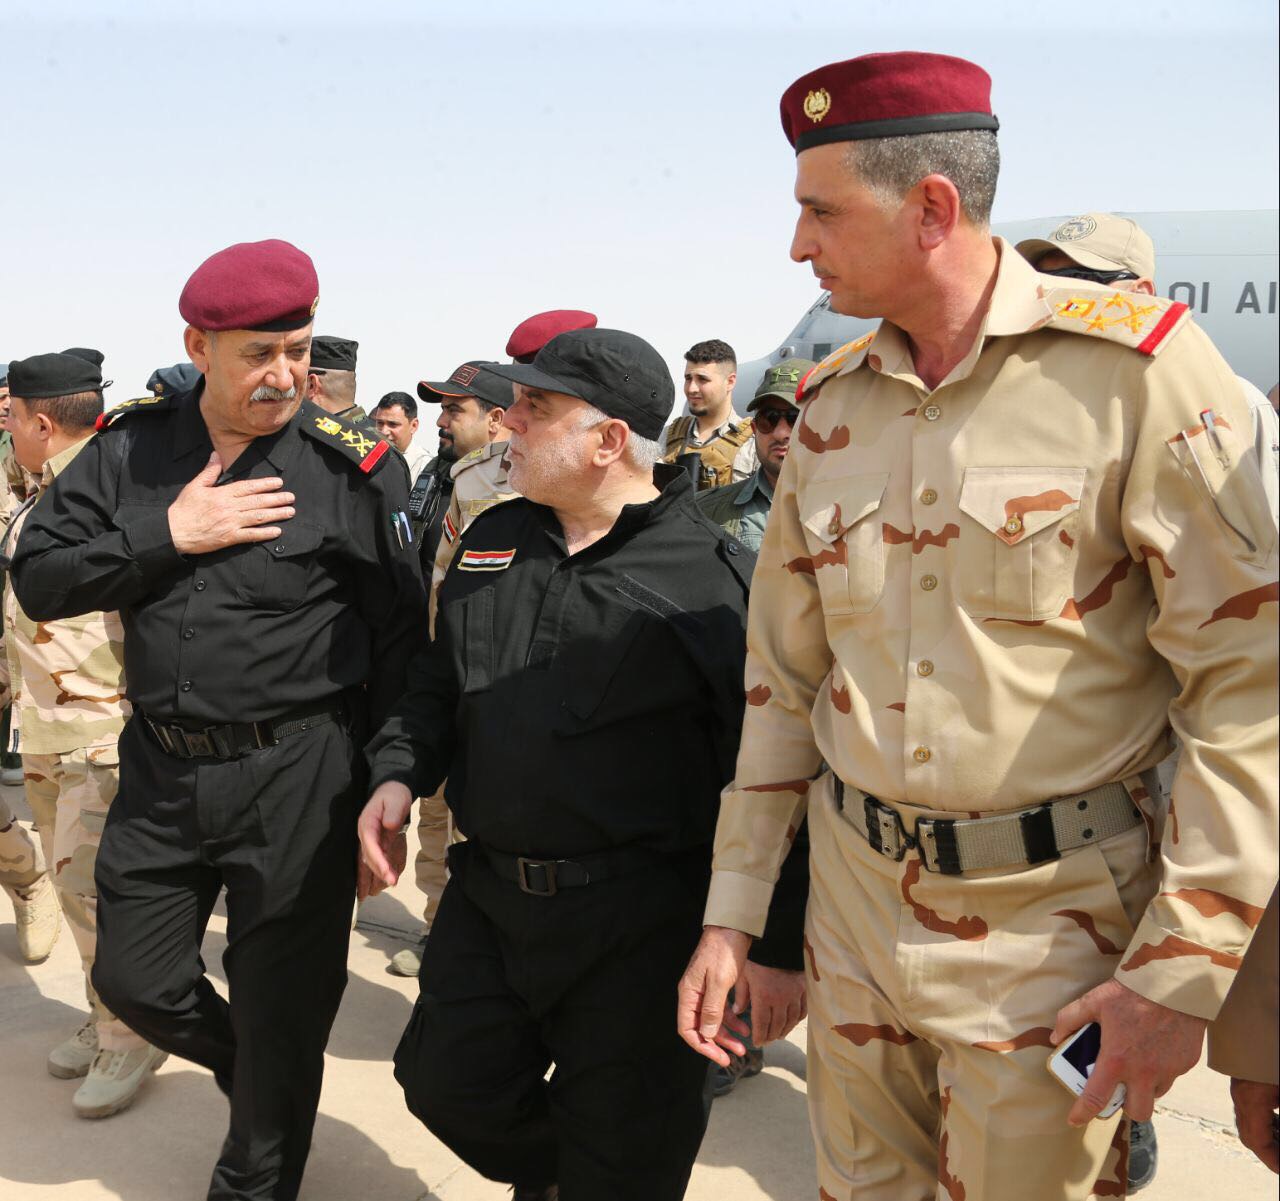 Iraq's Prime Minister Haider Al-Abadi visited Mosul, where Iraqi troops are hours away from a final victory on the so-called Islamic State (IS)